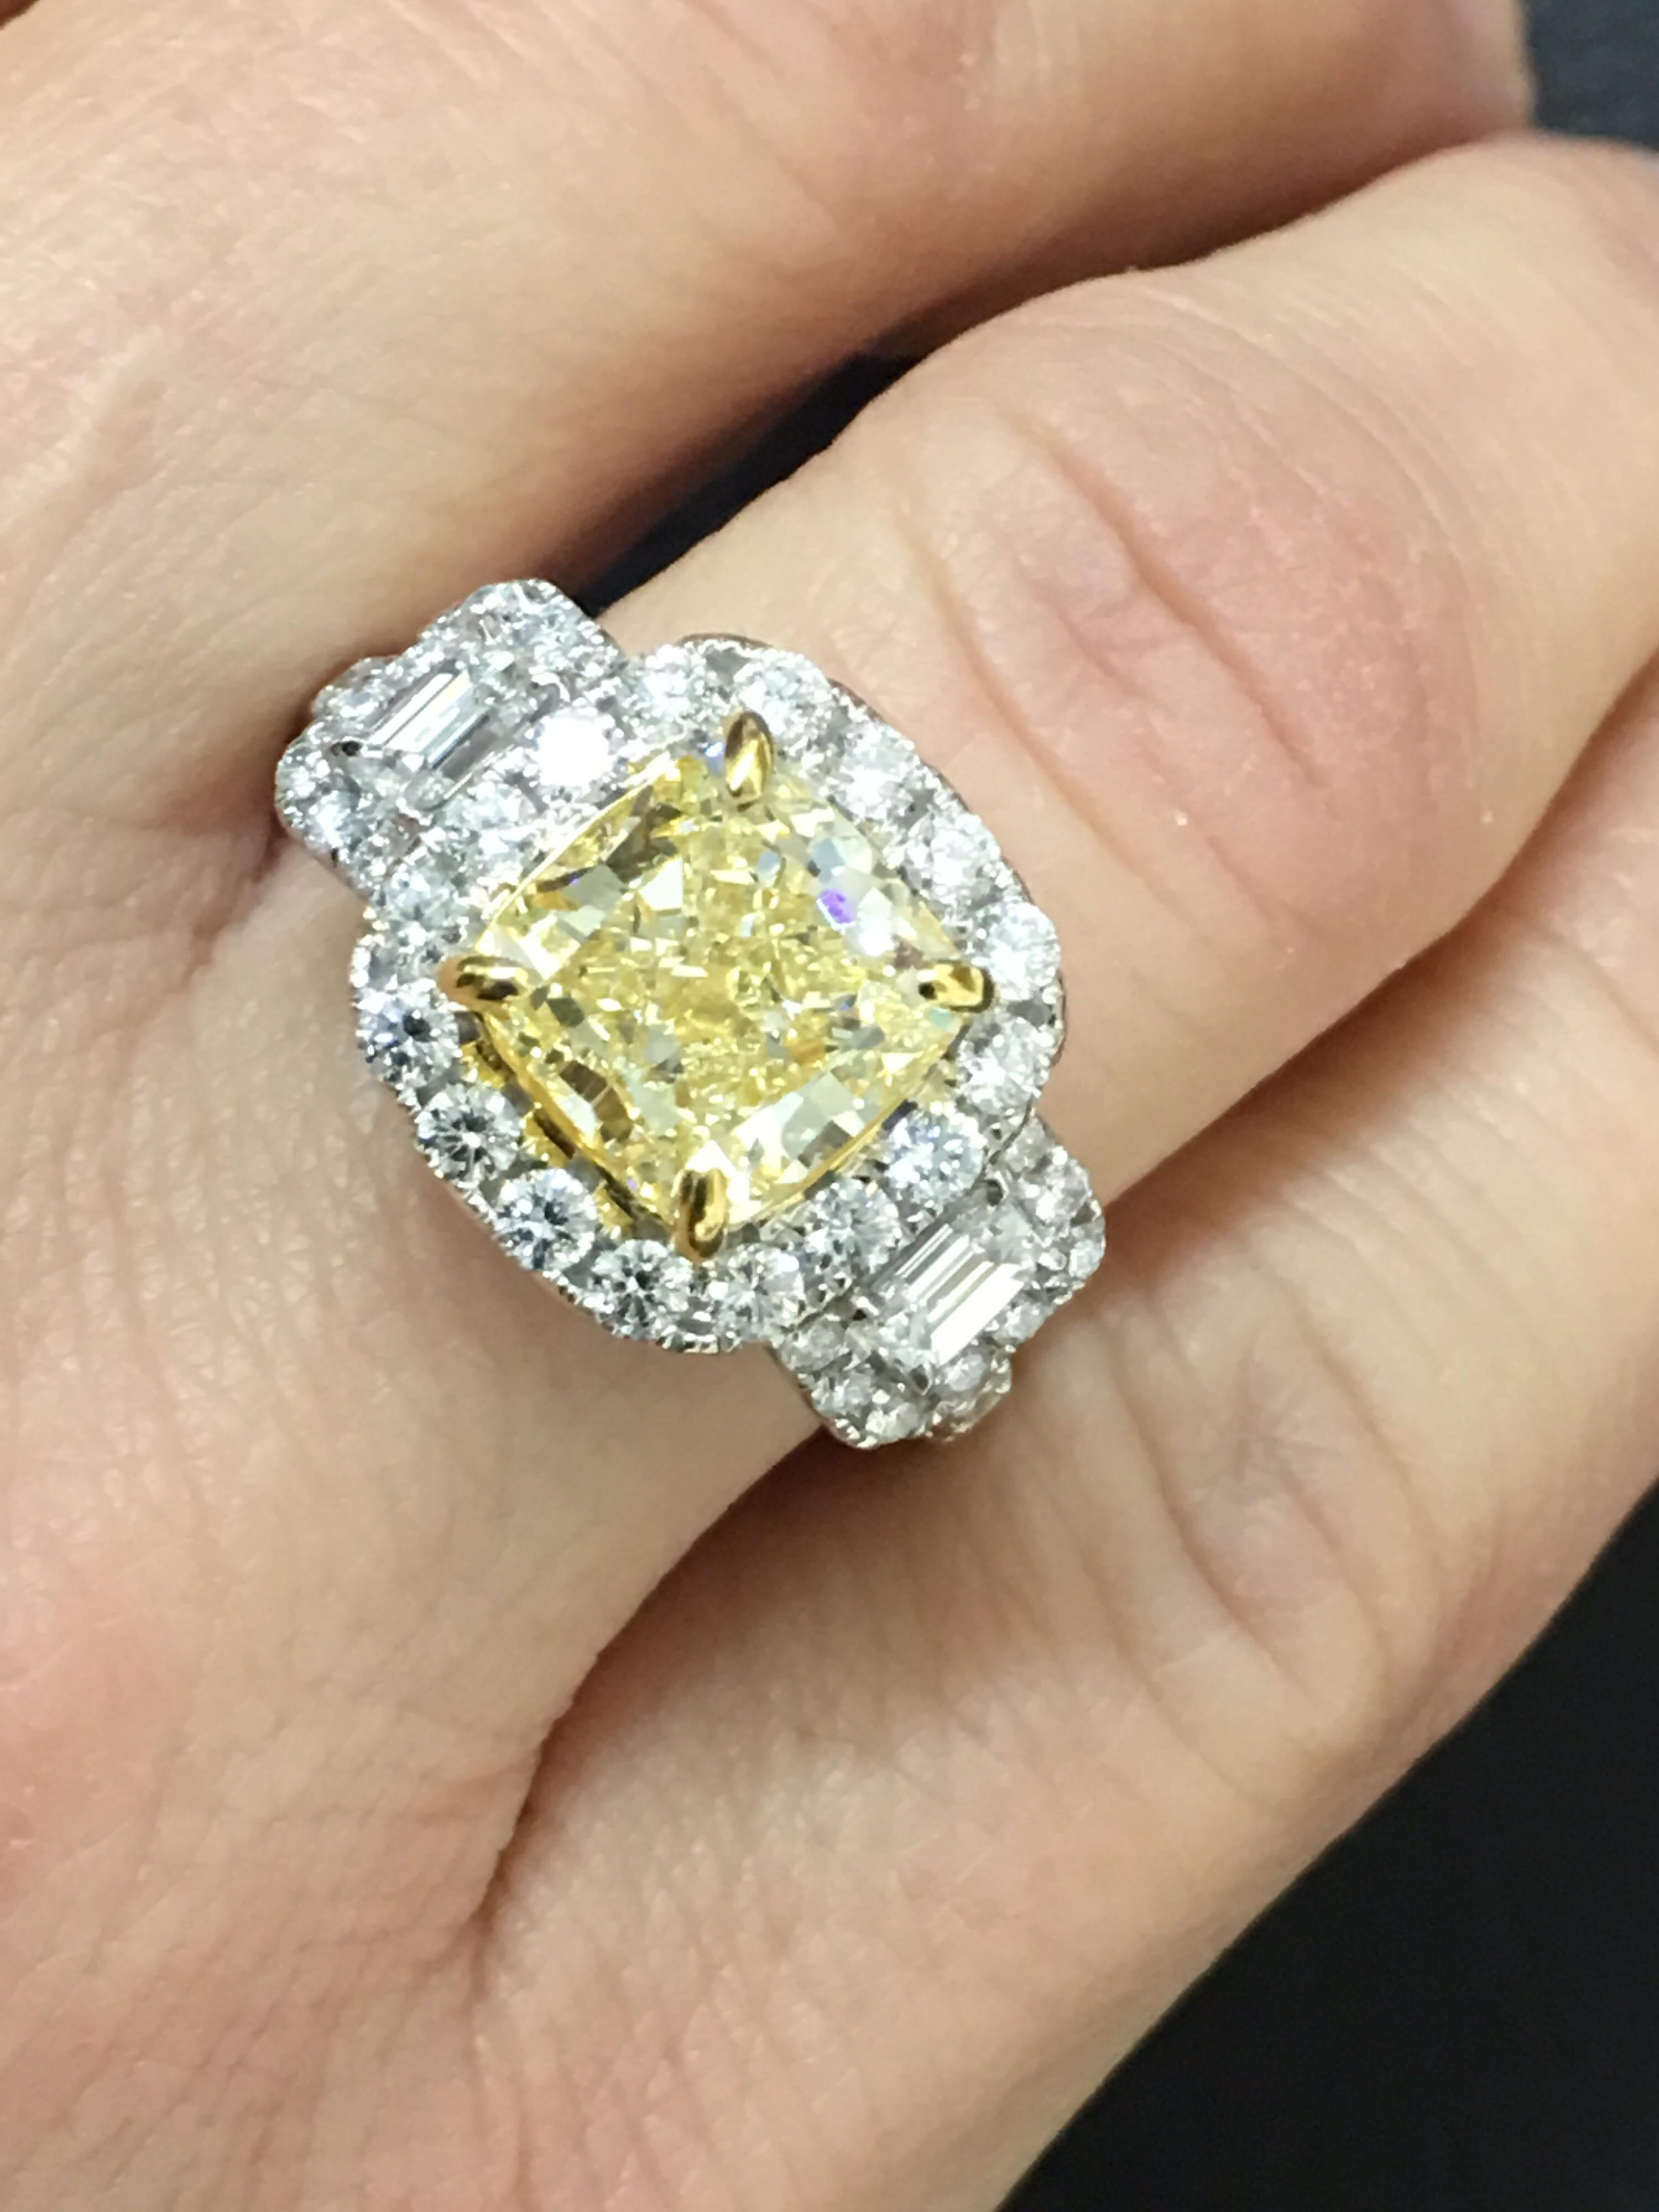 Natural yellow Center Diamond  is three (3 ) Carat and other white diamond total weight  1.16 
Center Piece is IGL Certified 3 carat yellow Diamond the ring is  Set in 18 Karat Two Tone Gold.
This is one of a kind hand crafted ring.
Size if the ring